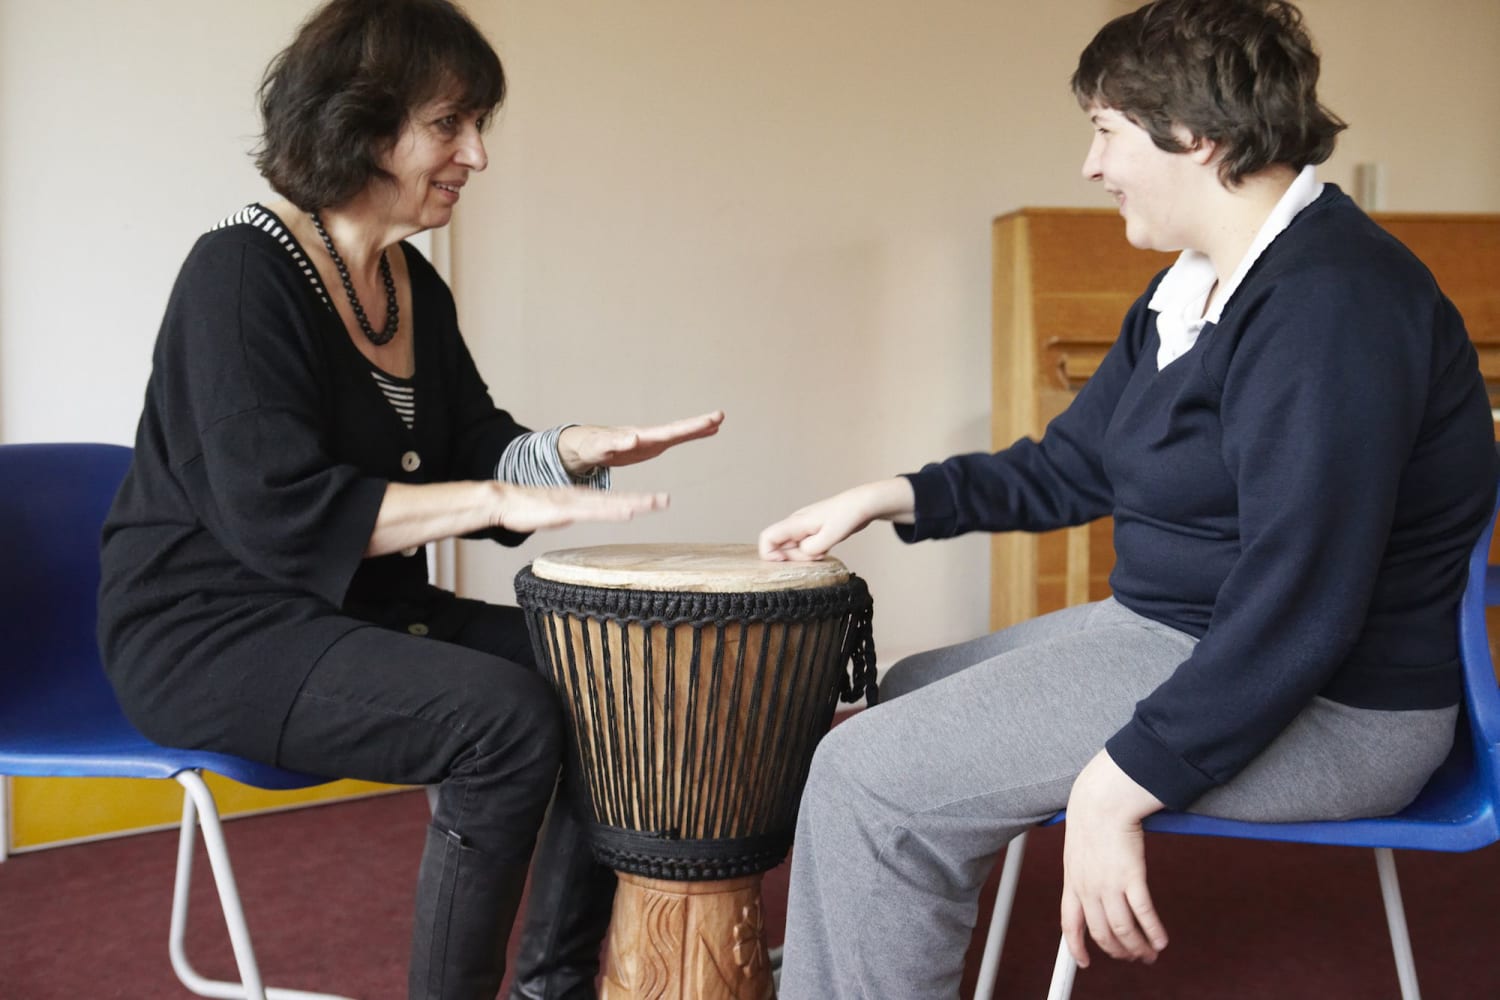 Express Yourself by Drumming for Healing